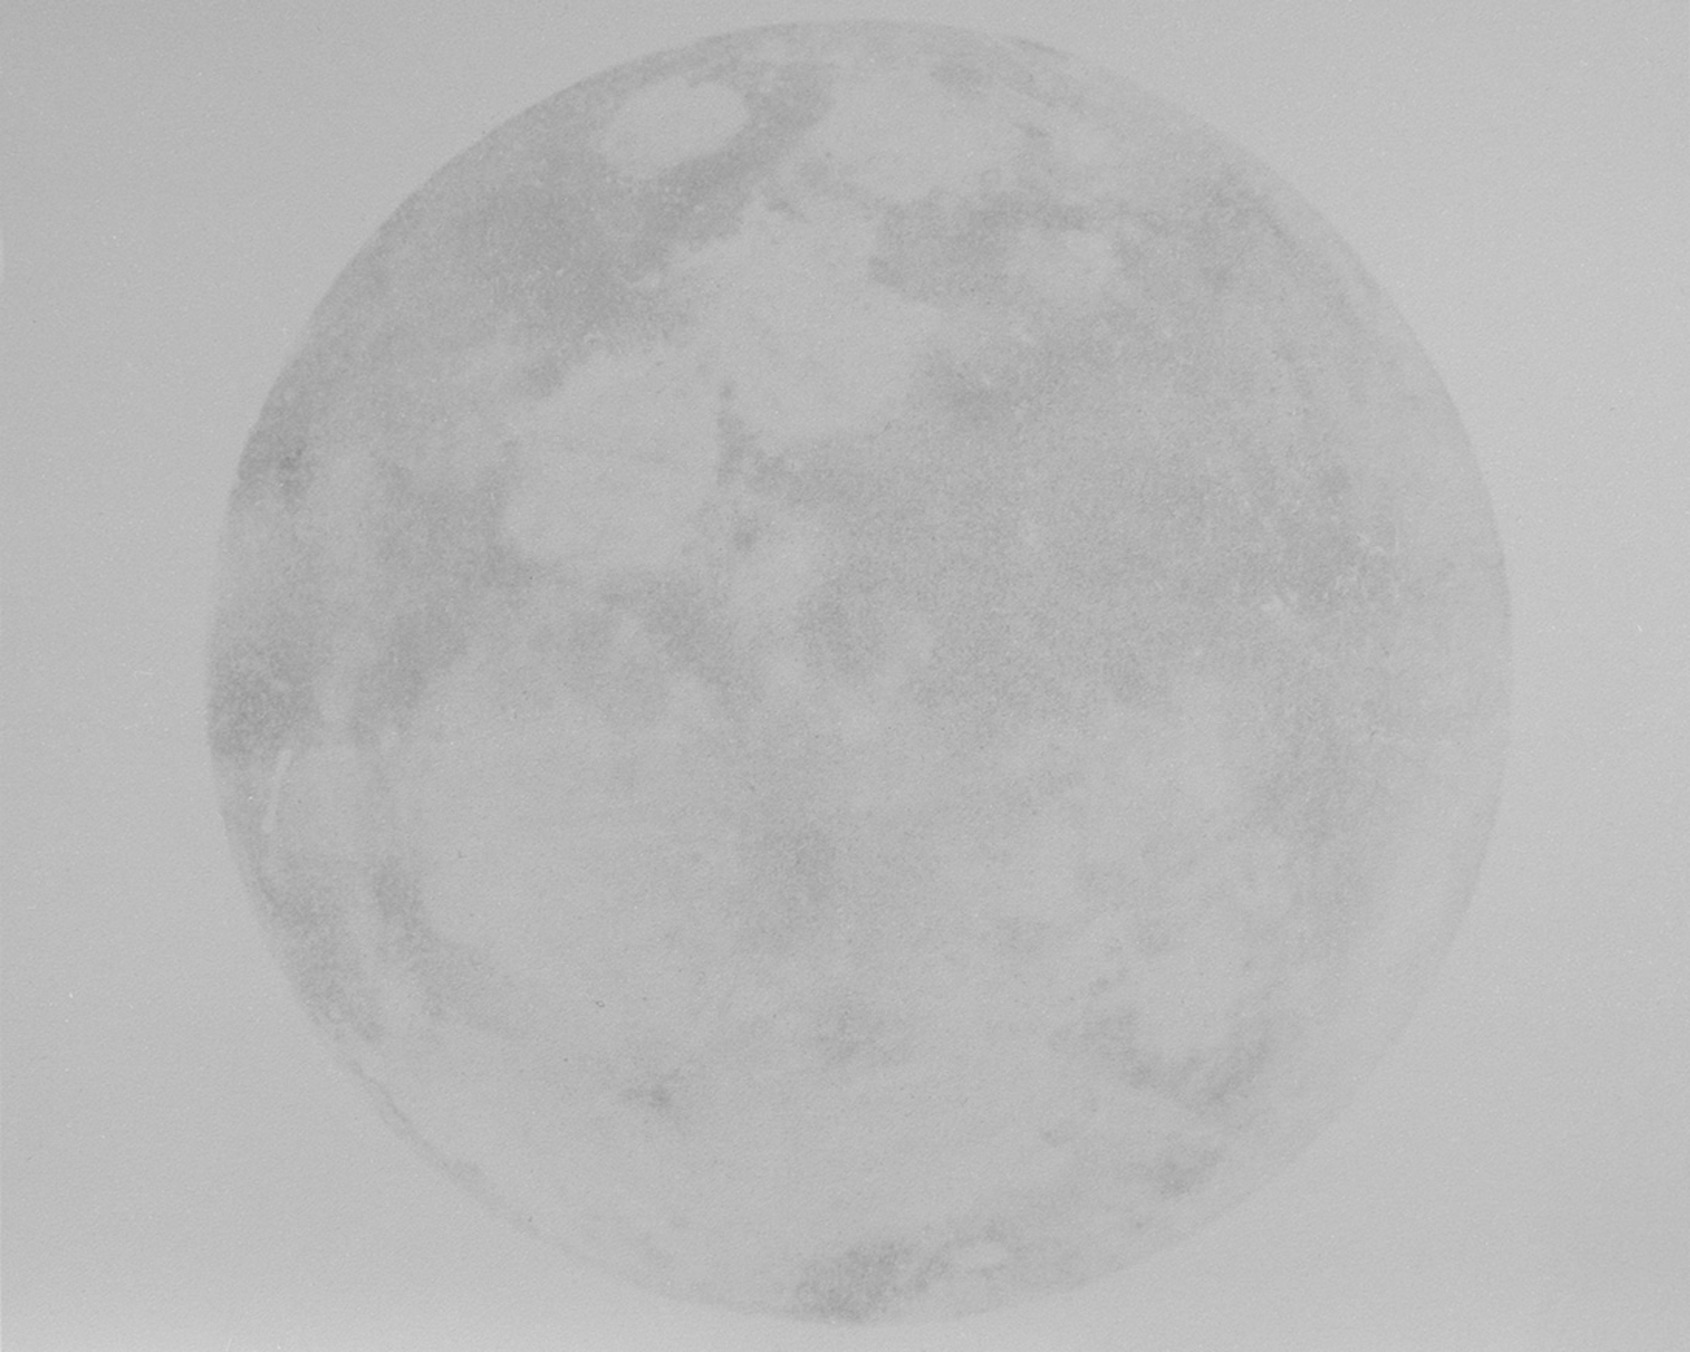 Full Moon 254-06, Jean Claude Wouters, 2010, 80×100cm. On llford mat baryte paper,with sistan silver lmage stabilizer treatment. Courtesy of artist. 